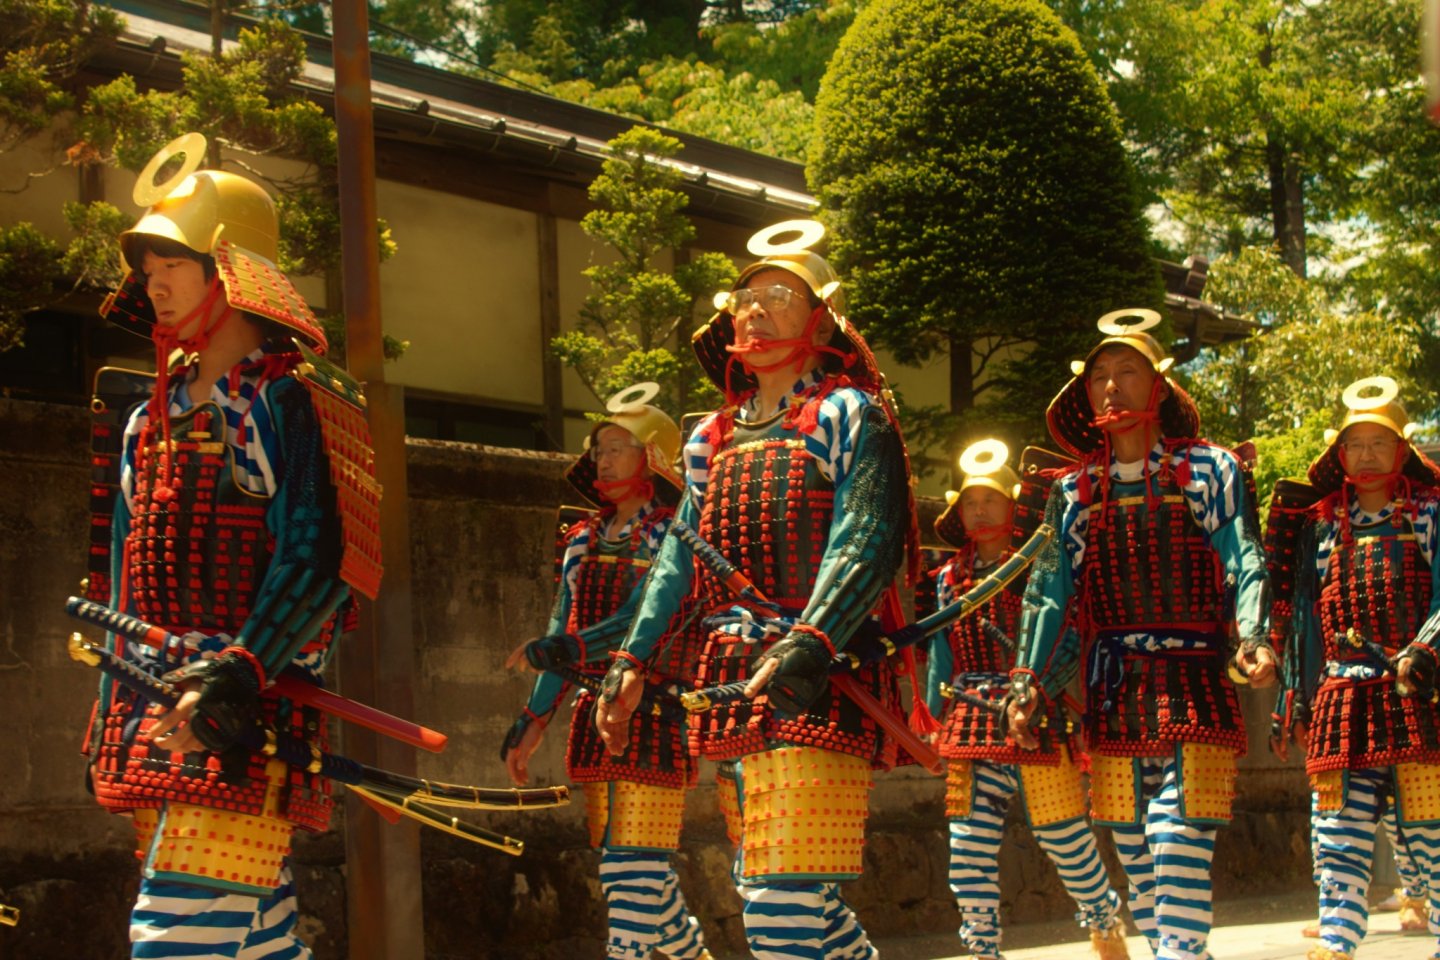 Impressive blue and red samurai warriors in lamellar armor and gold-colored kabuto helmets are an example traditional dress displayed during the procession.